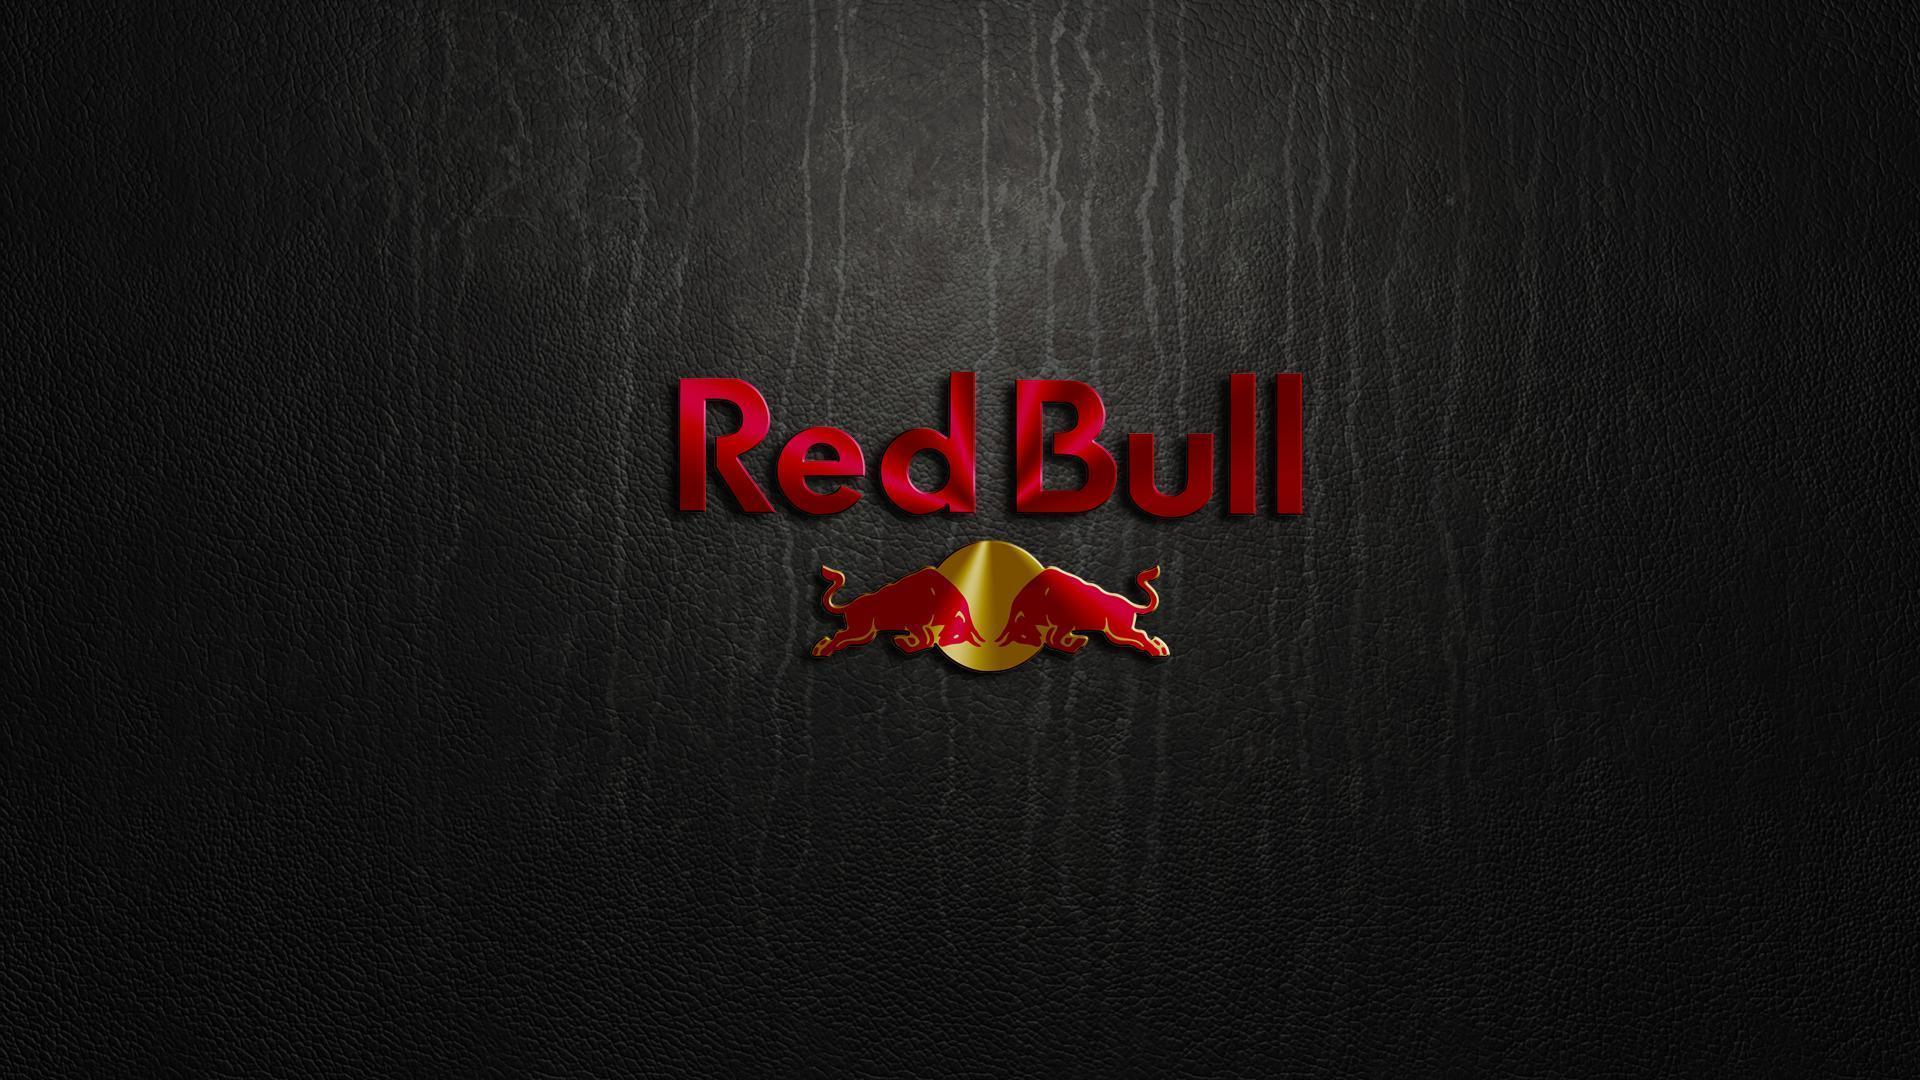 Red Bull Logo Leather Texture wallpaperx1080